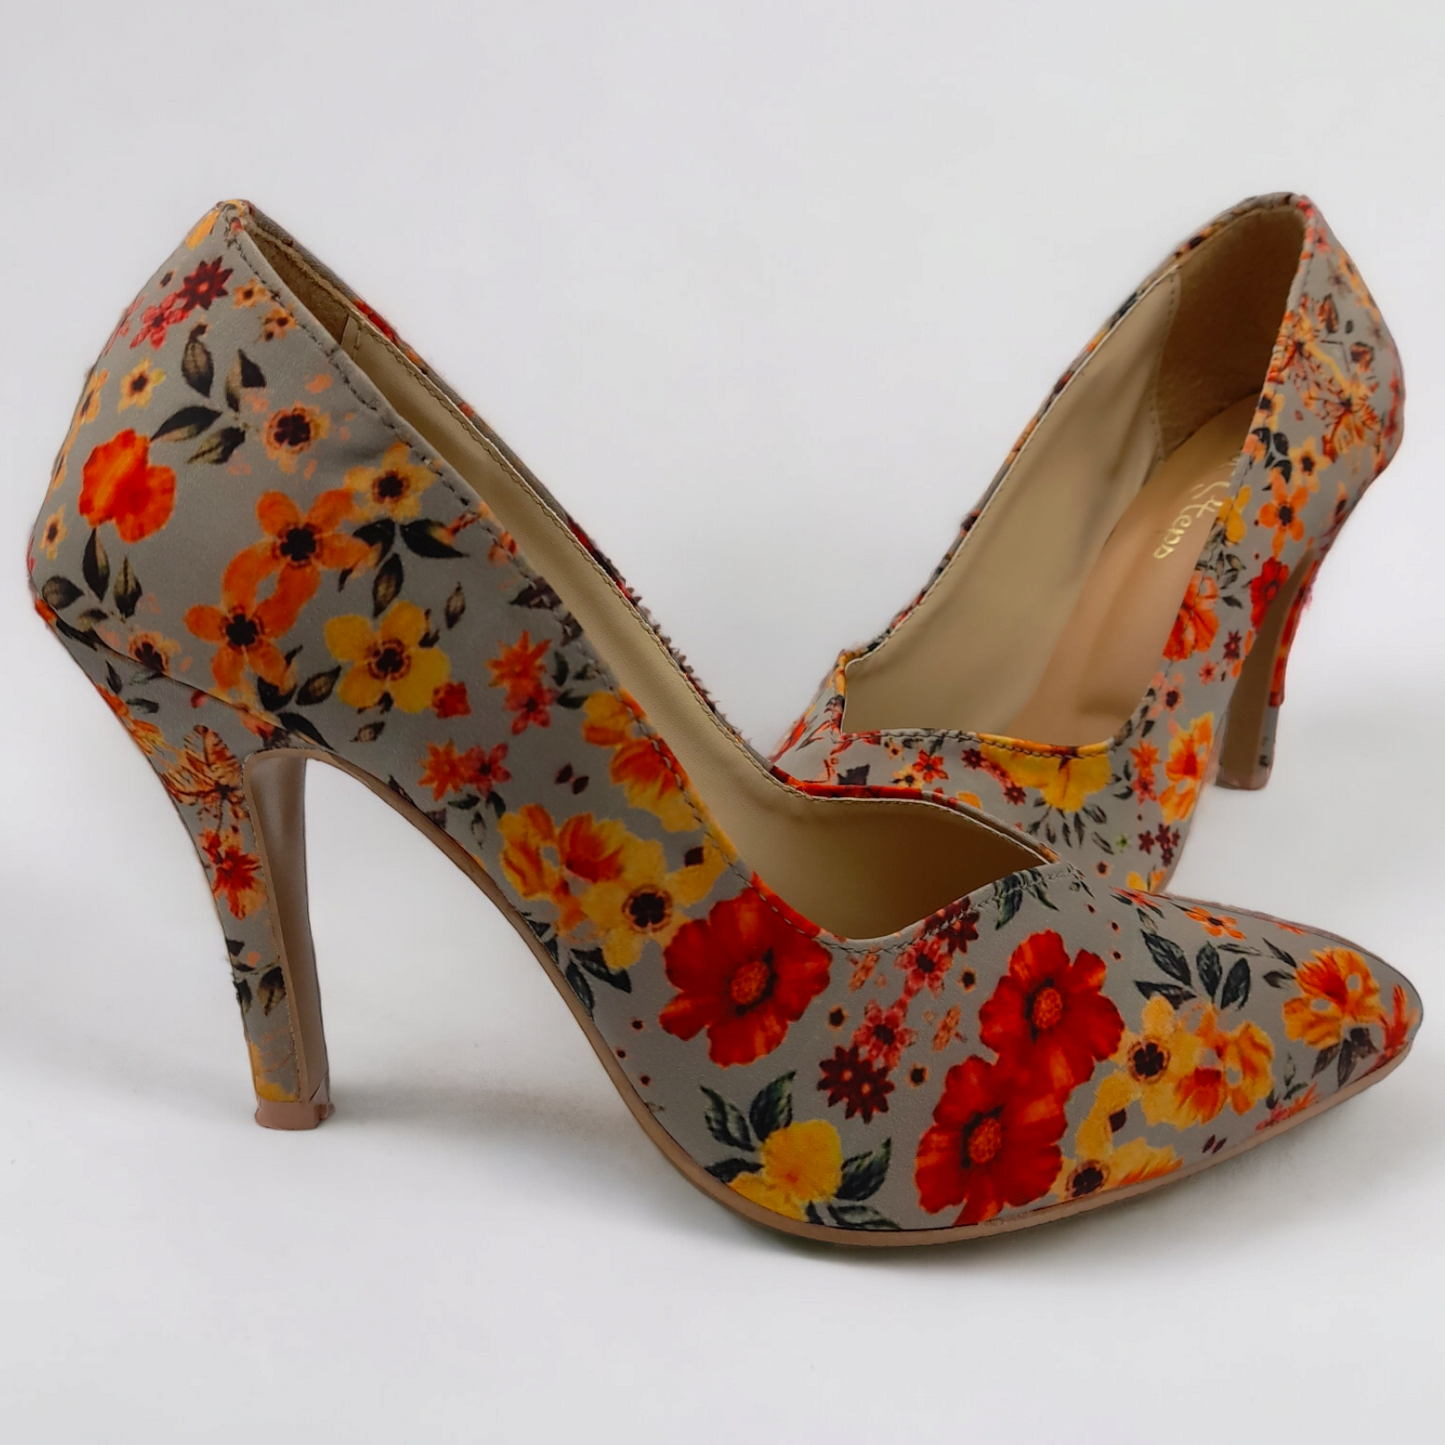 Floral Court Shoes Heels For Women